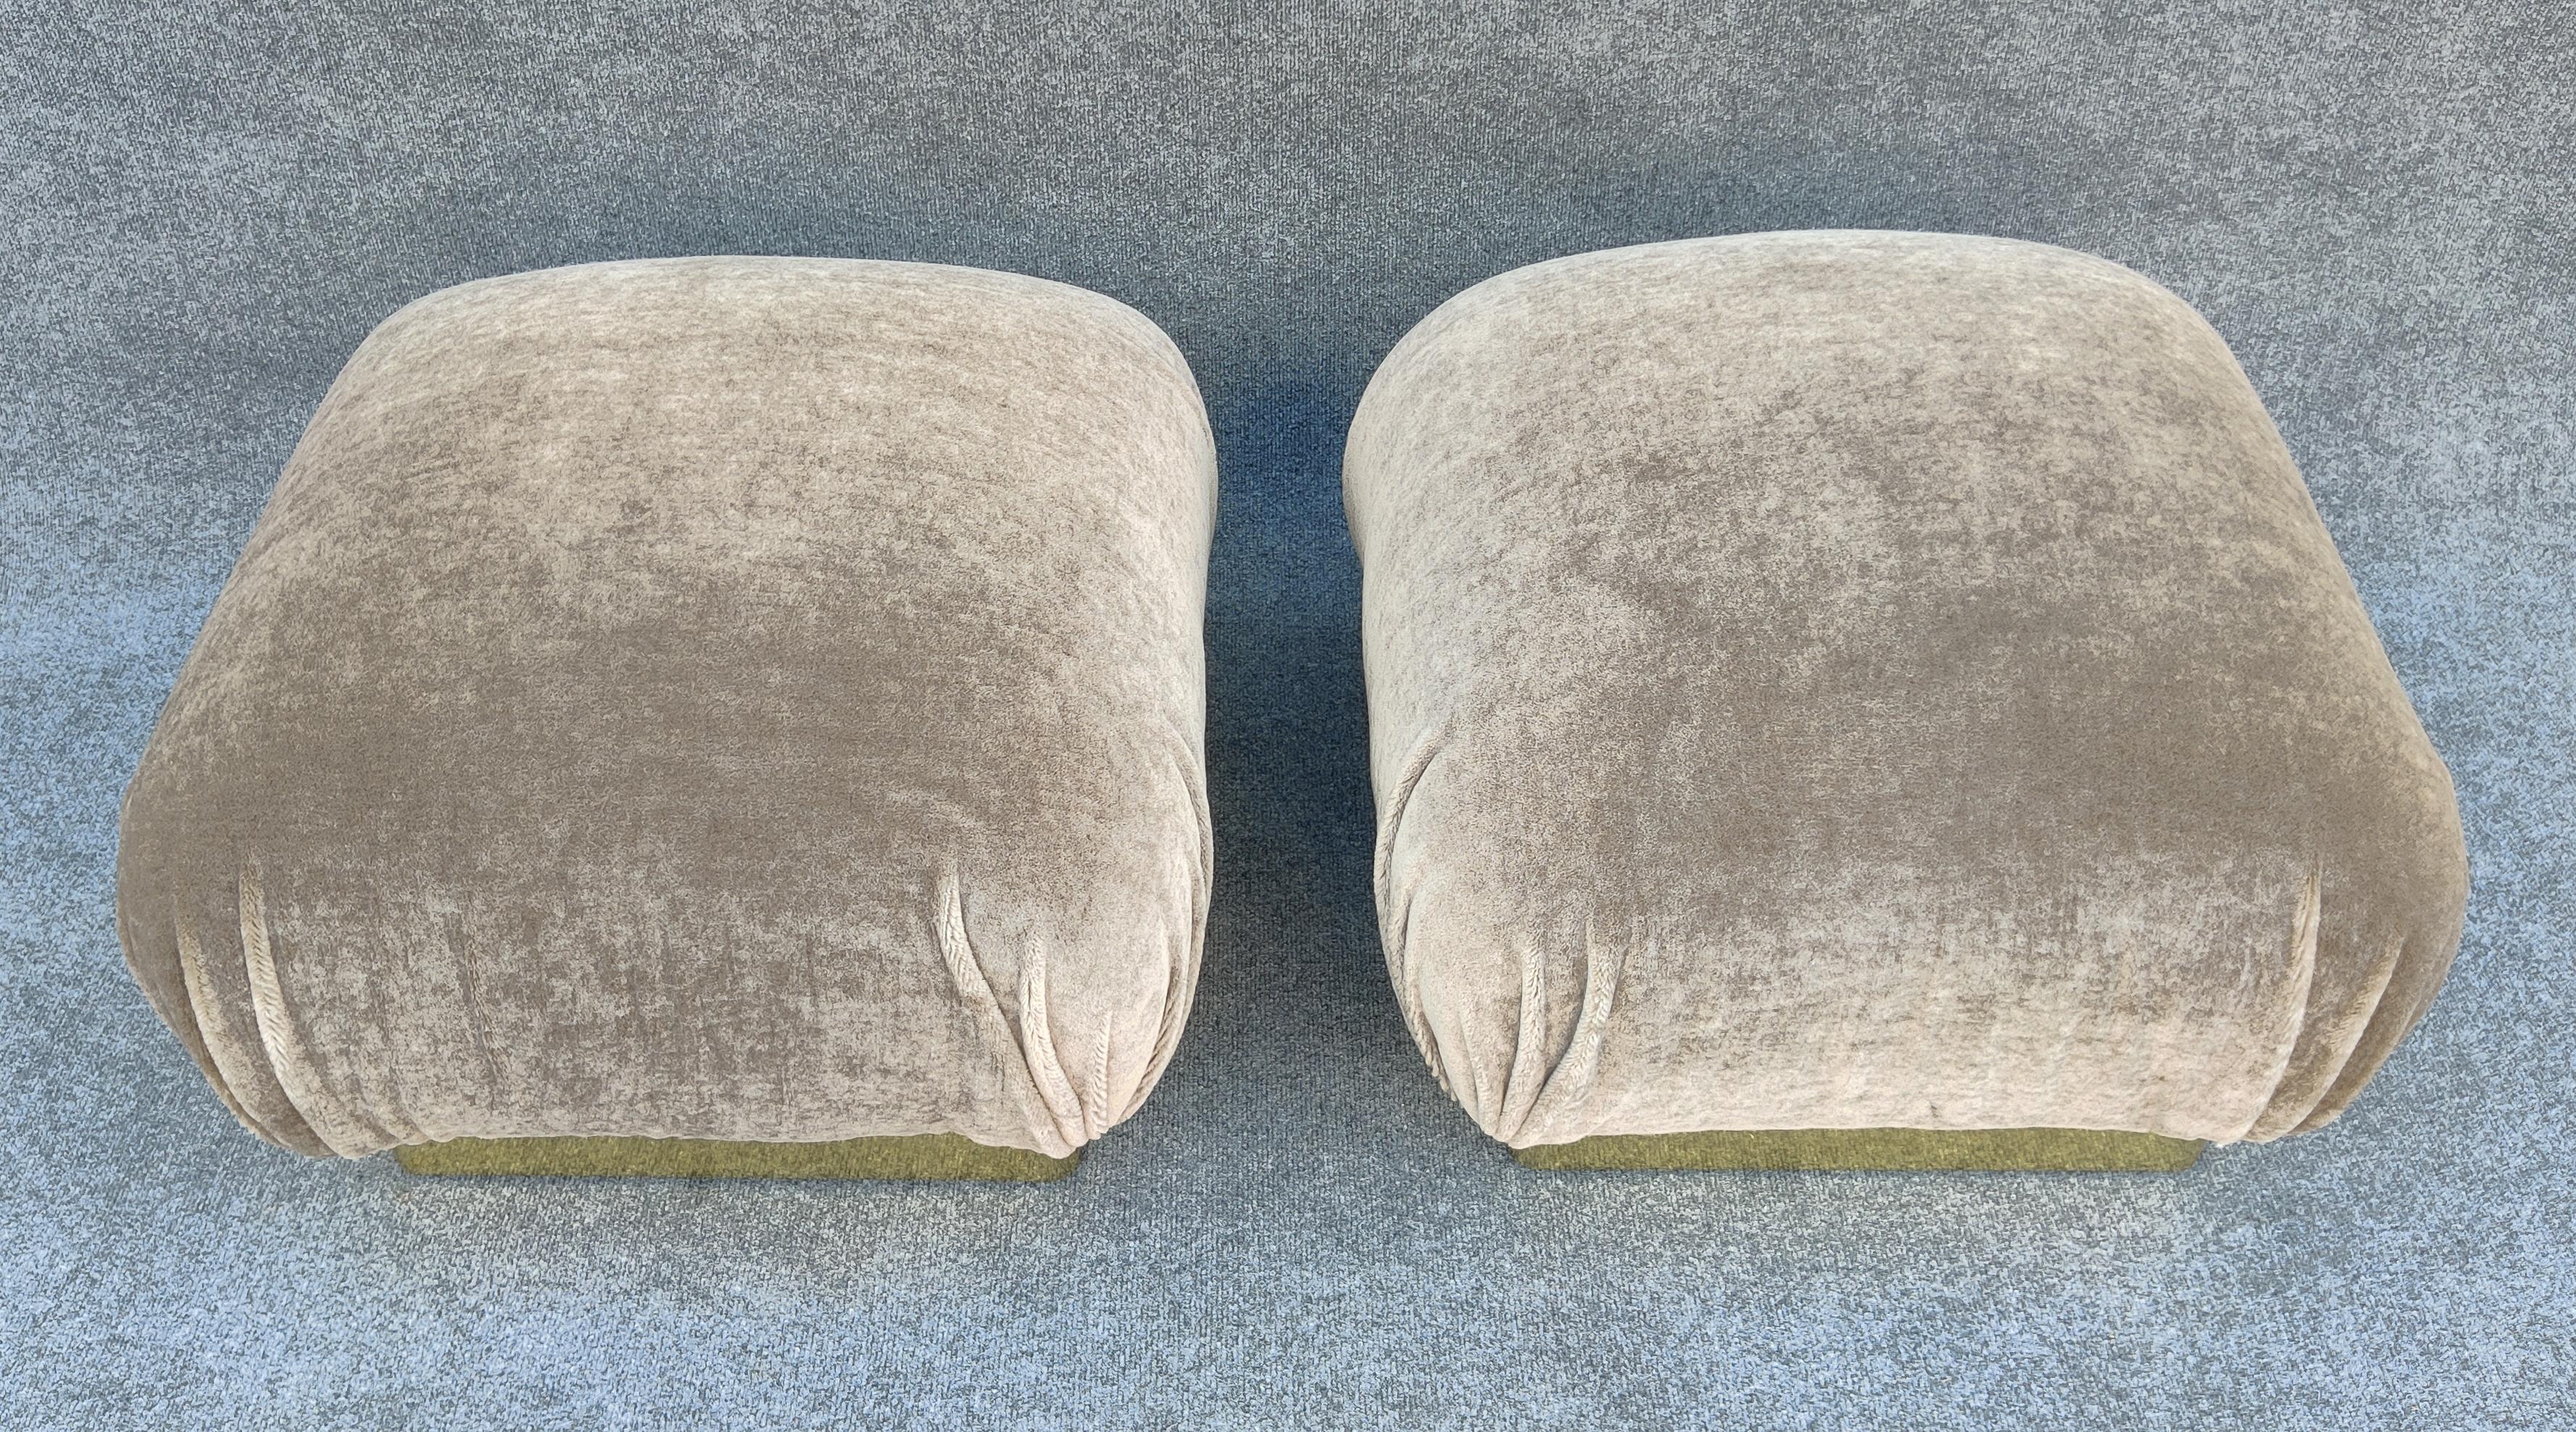 This pair of poufs or ottomans were made in the 1980s after the design was made iconic by Karl Springer. On a base of brass plated sheet metal over a wooden frame, this pair has been newly reupholstered in Maharam's 